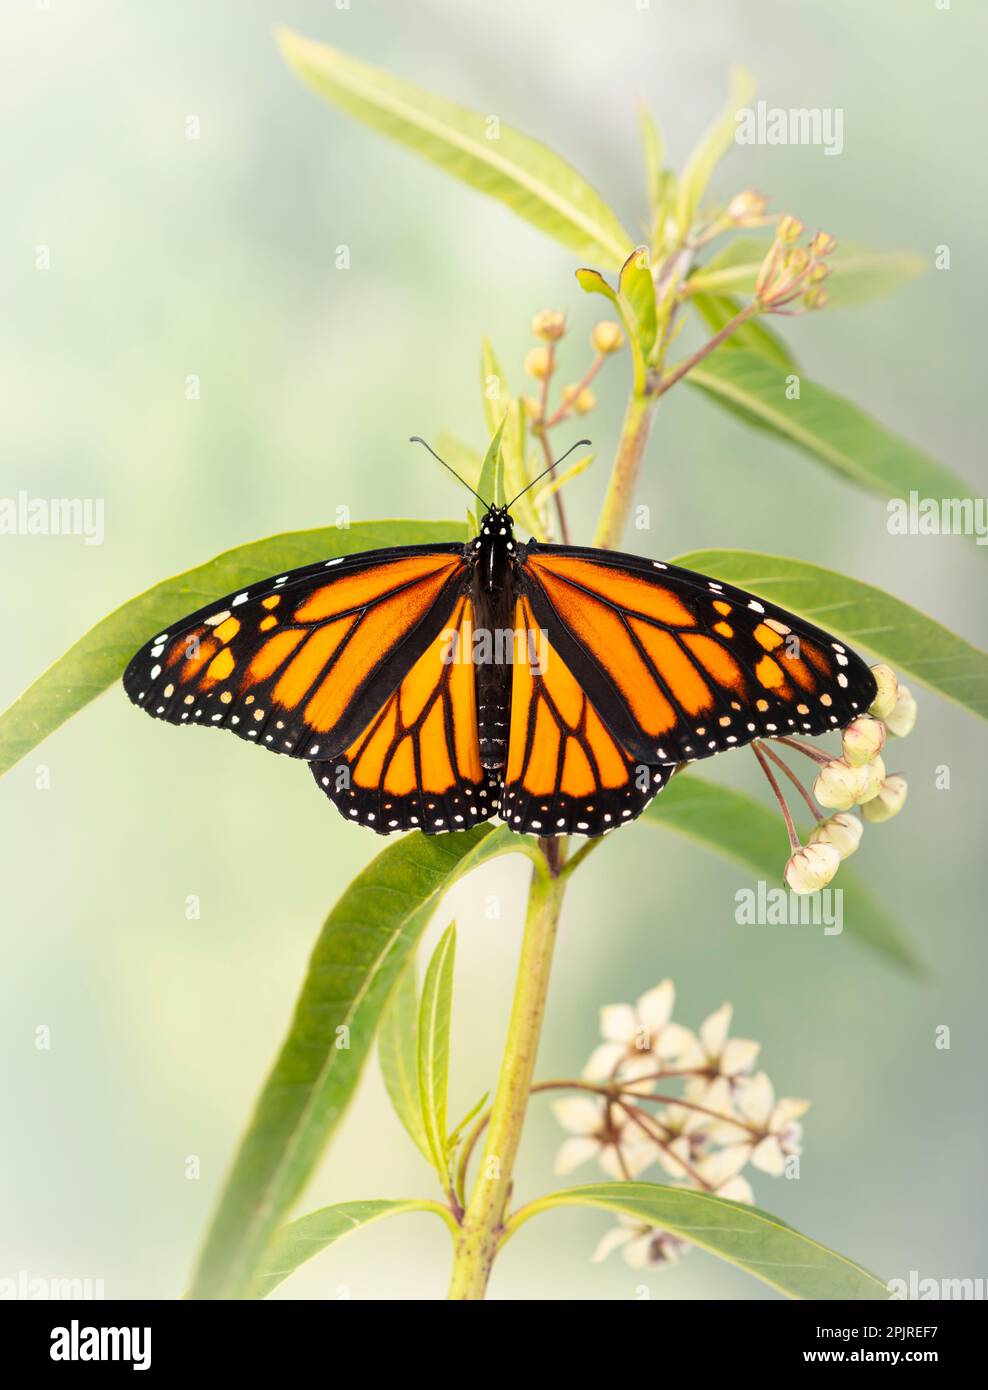 A monarch butterfly (danaus plexippus) with wings open, on a milkweed plant Stock Photo